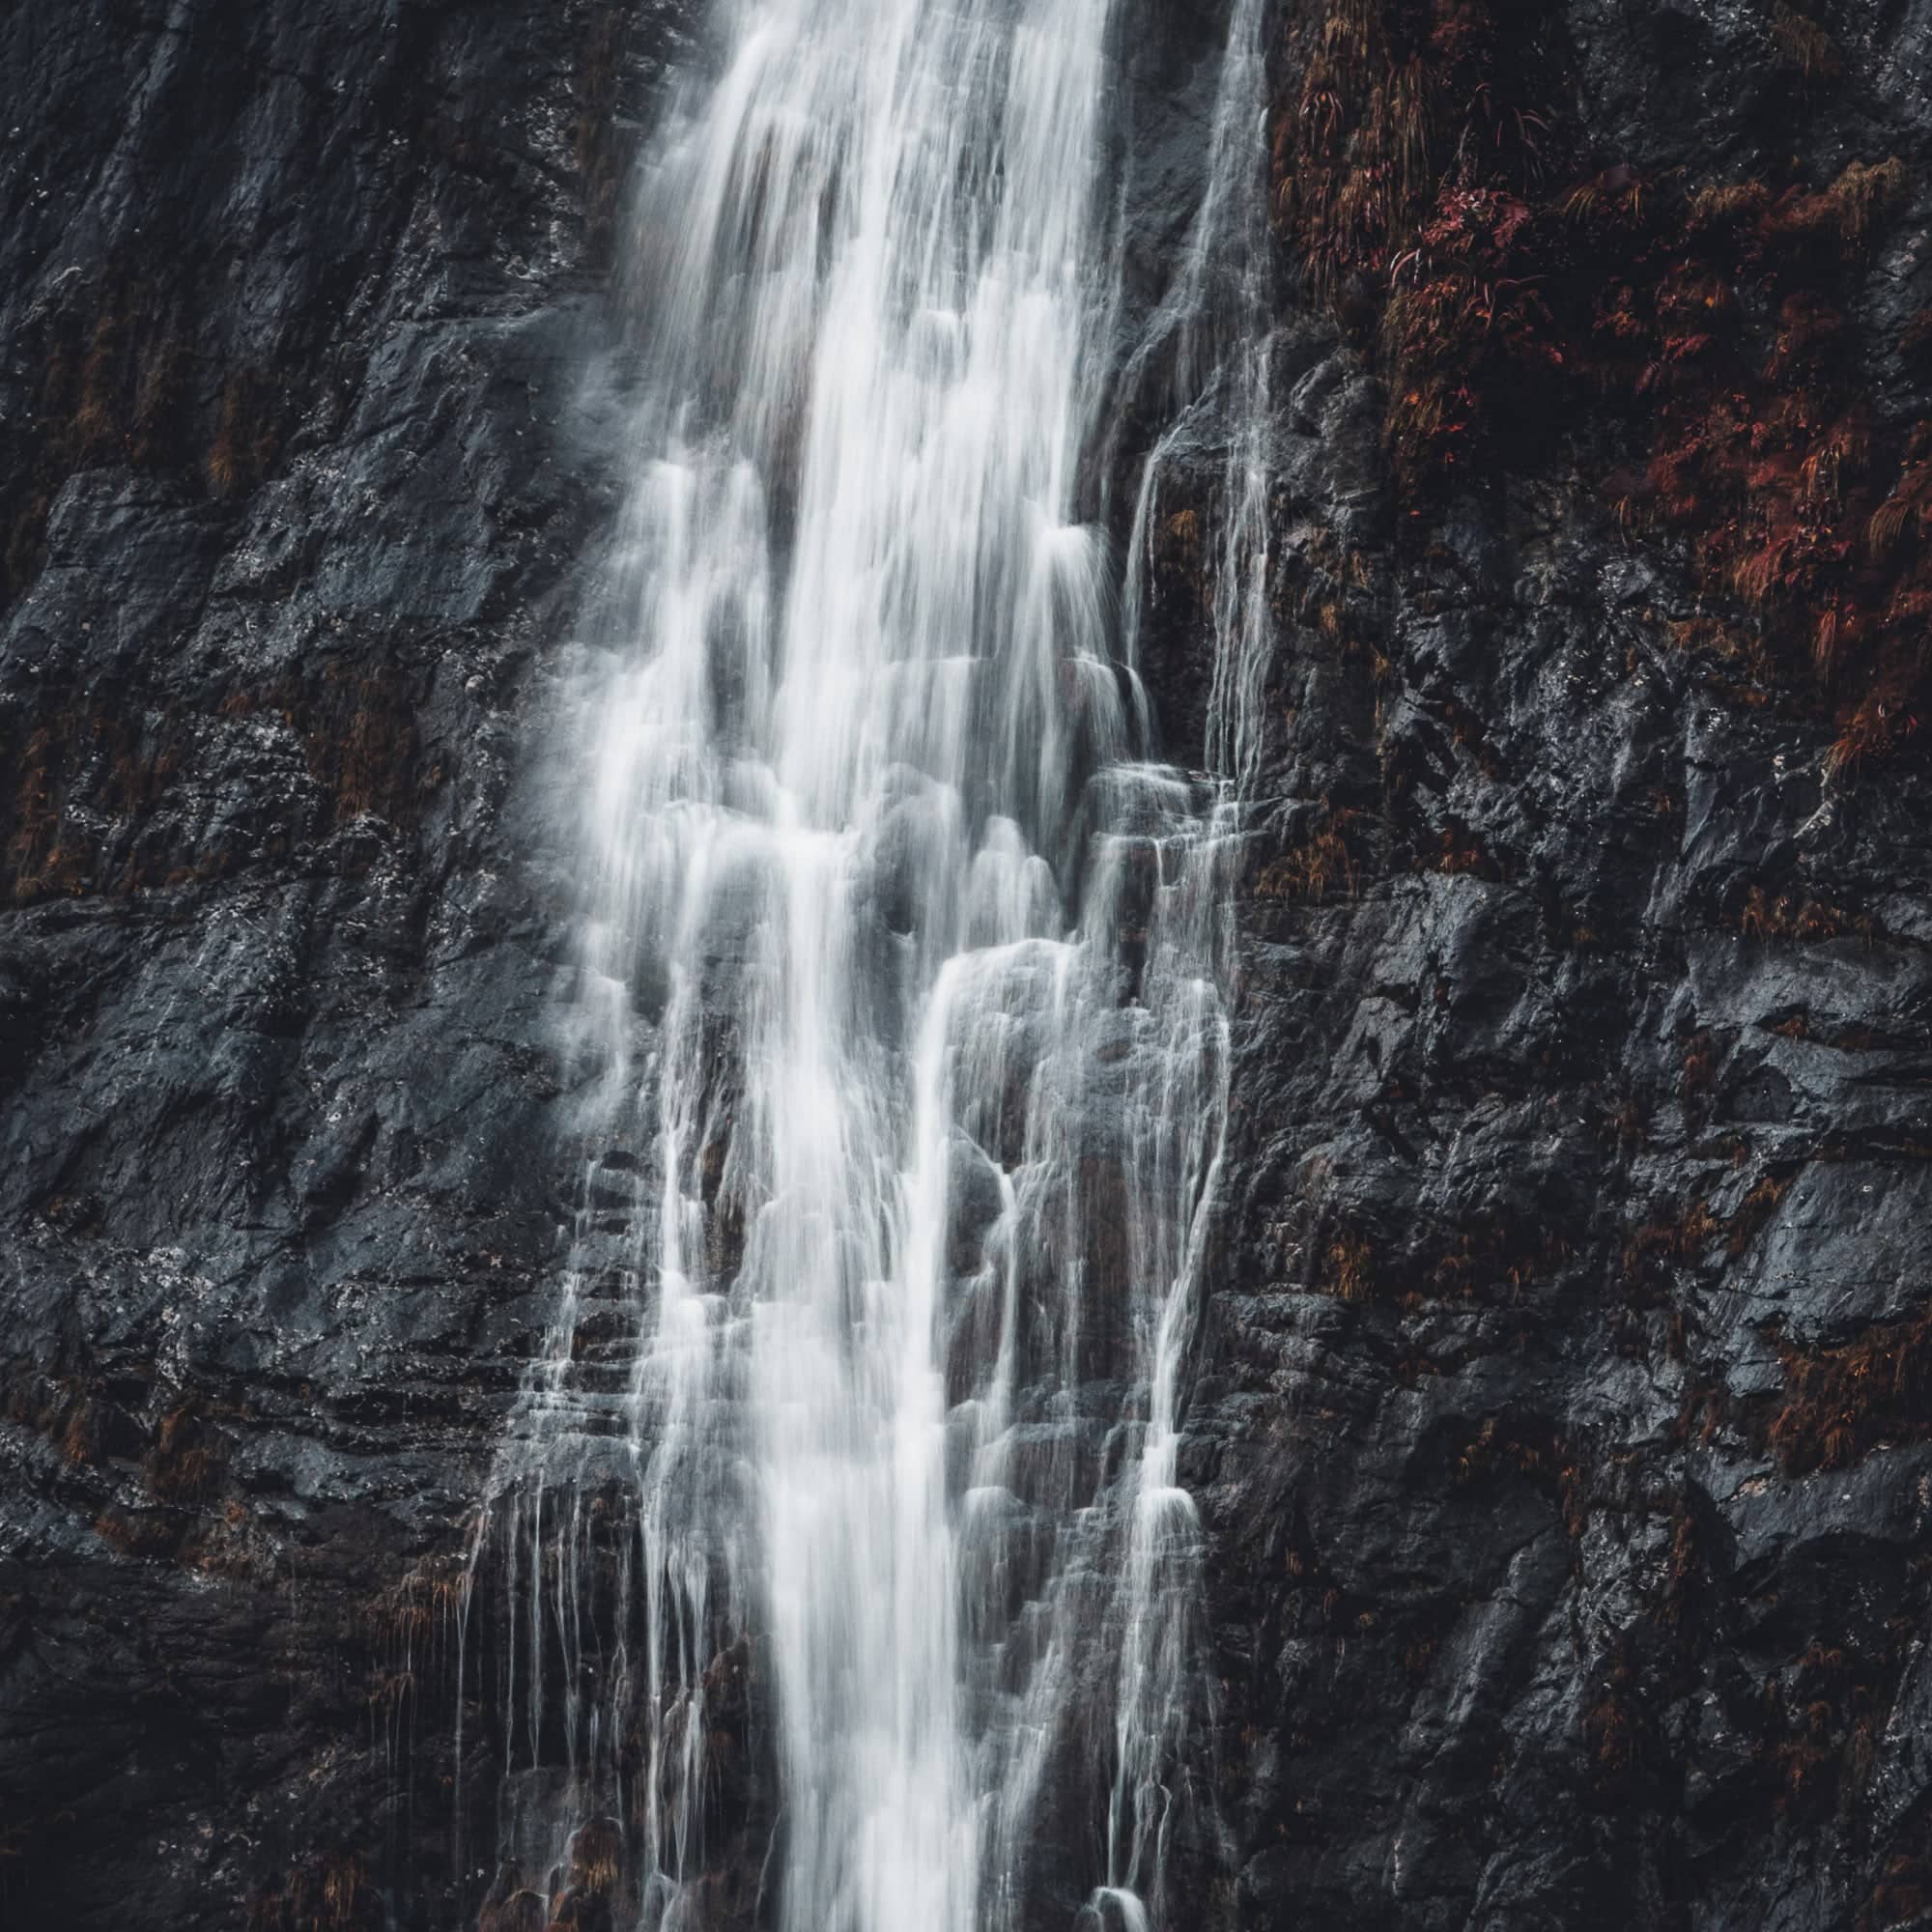 A waterfall cascades down a rugged cliff, a misty dance of water called "Rising Souls" in Milford Sound, New Zealand.